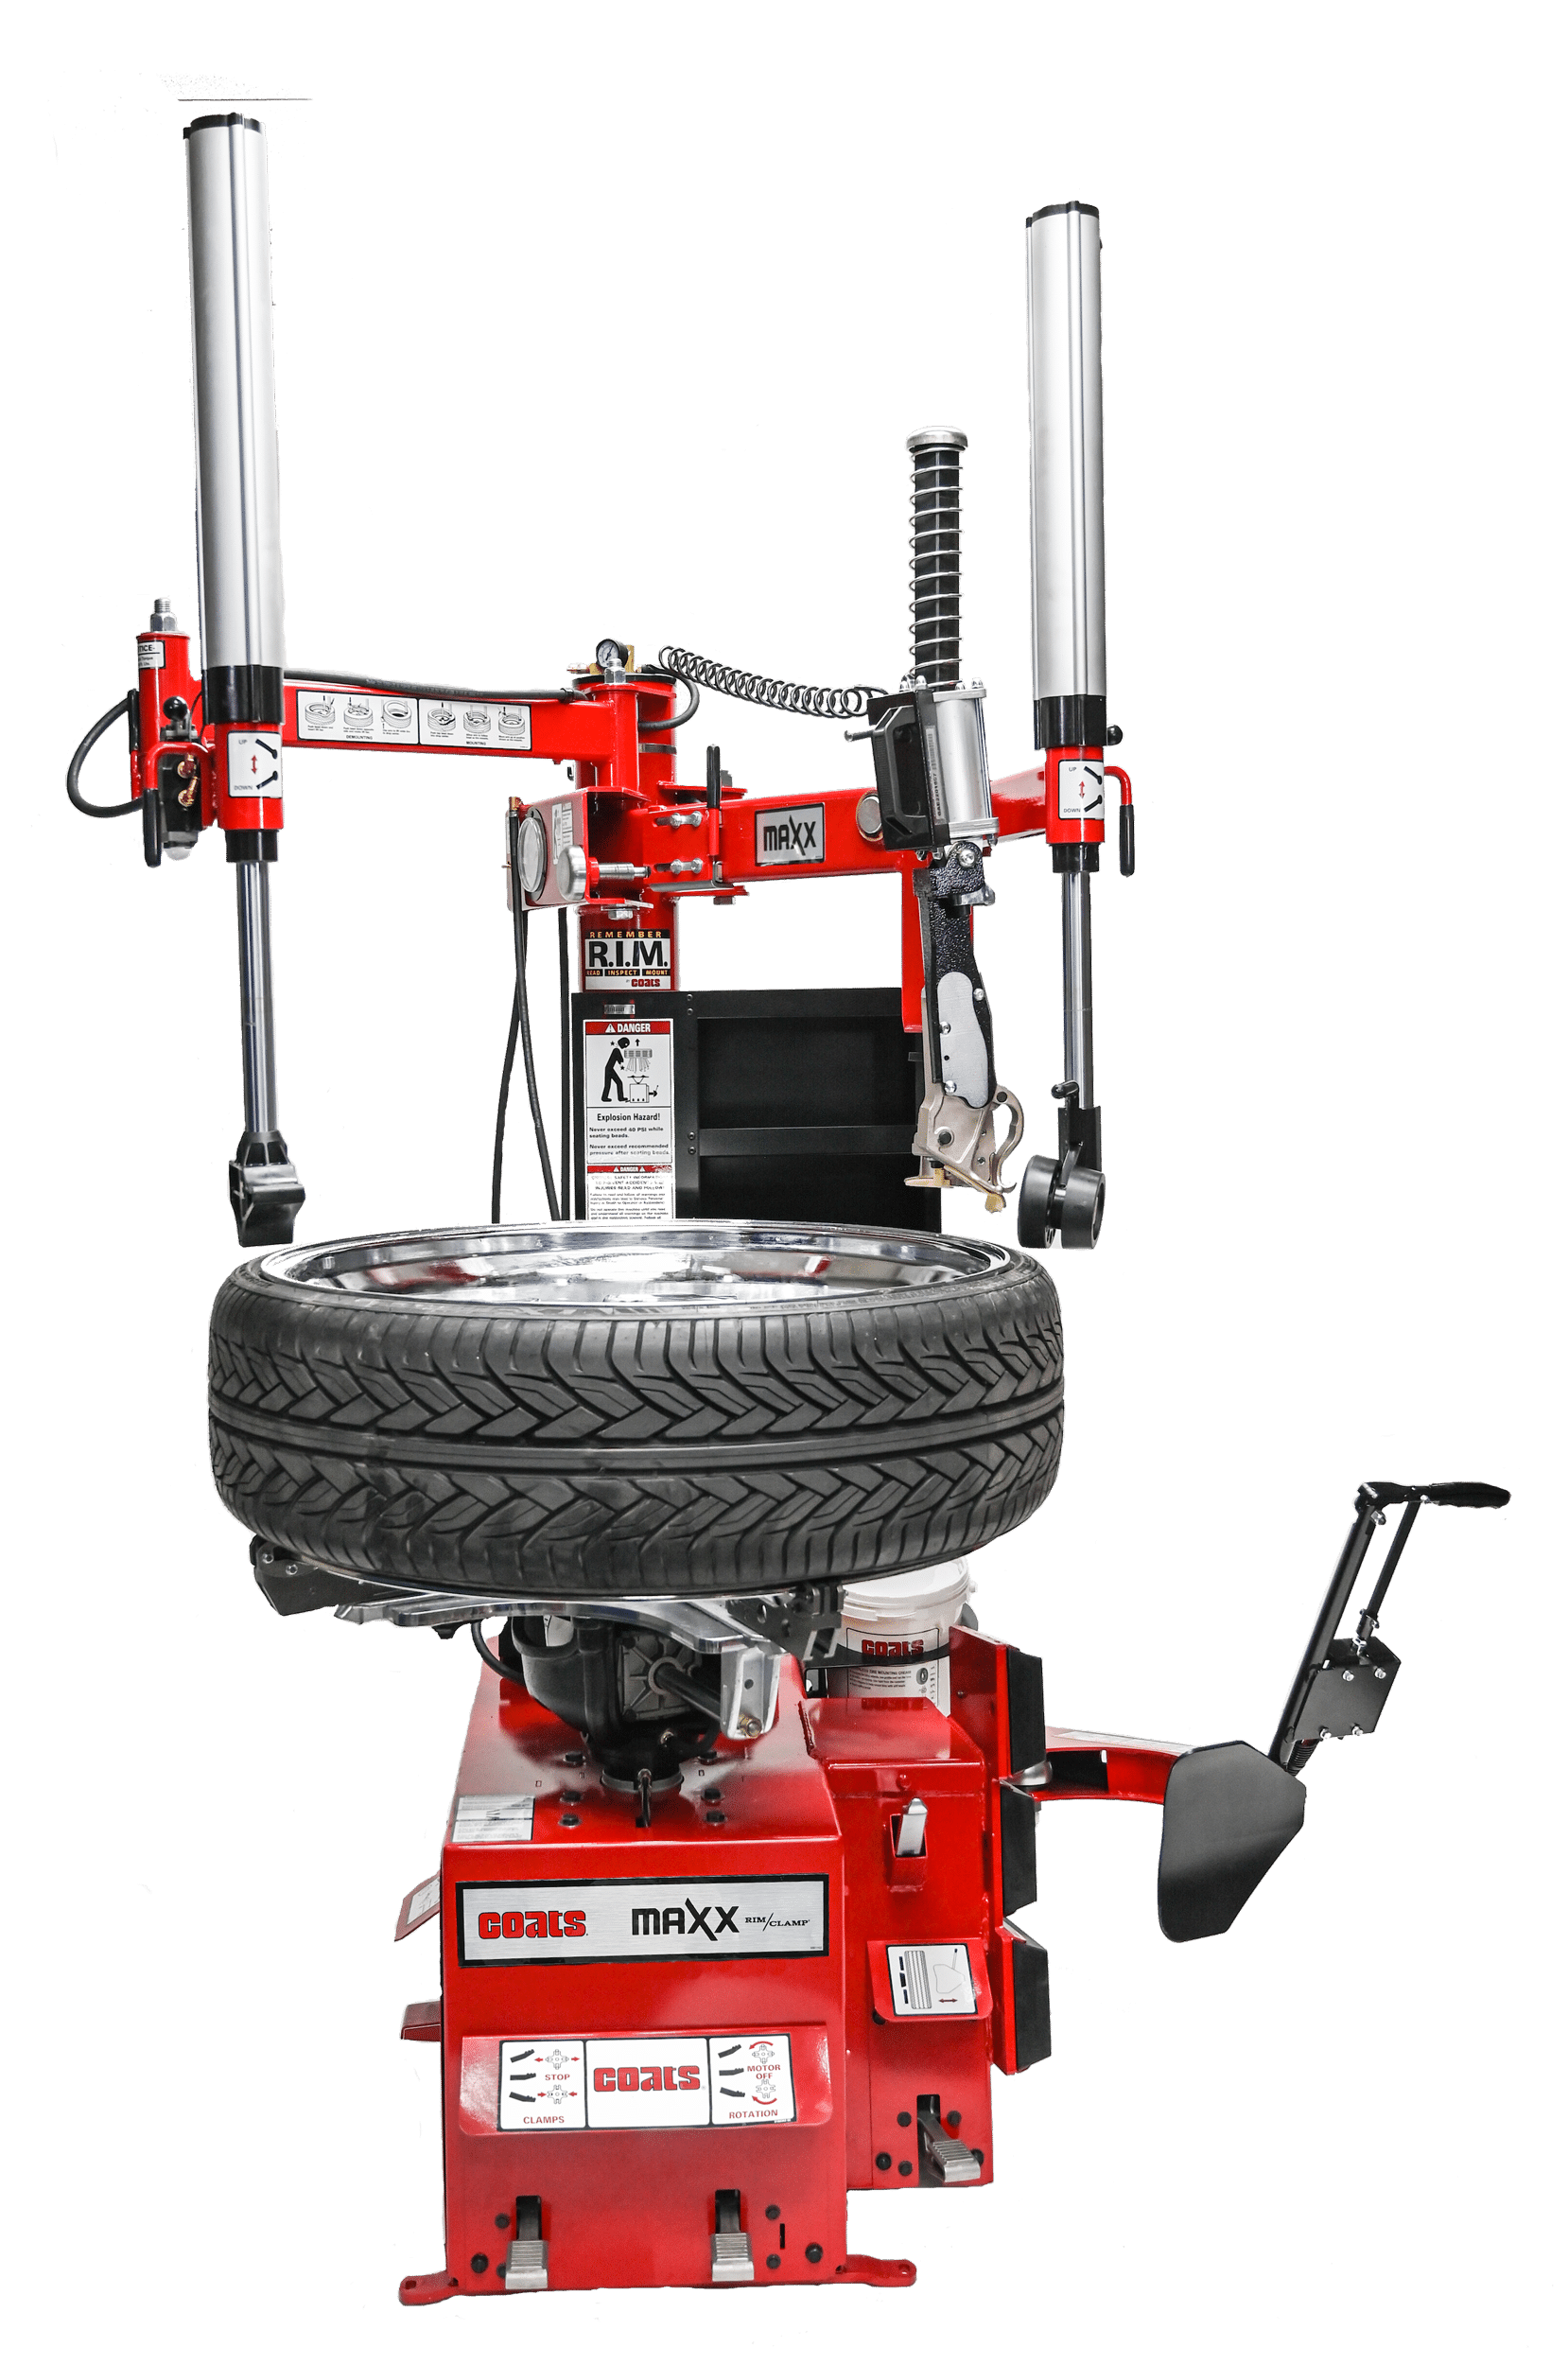 Coats Maxx 90 tire changer image links to its product page